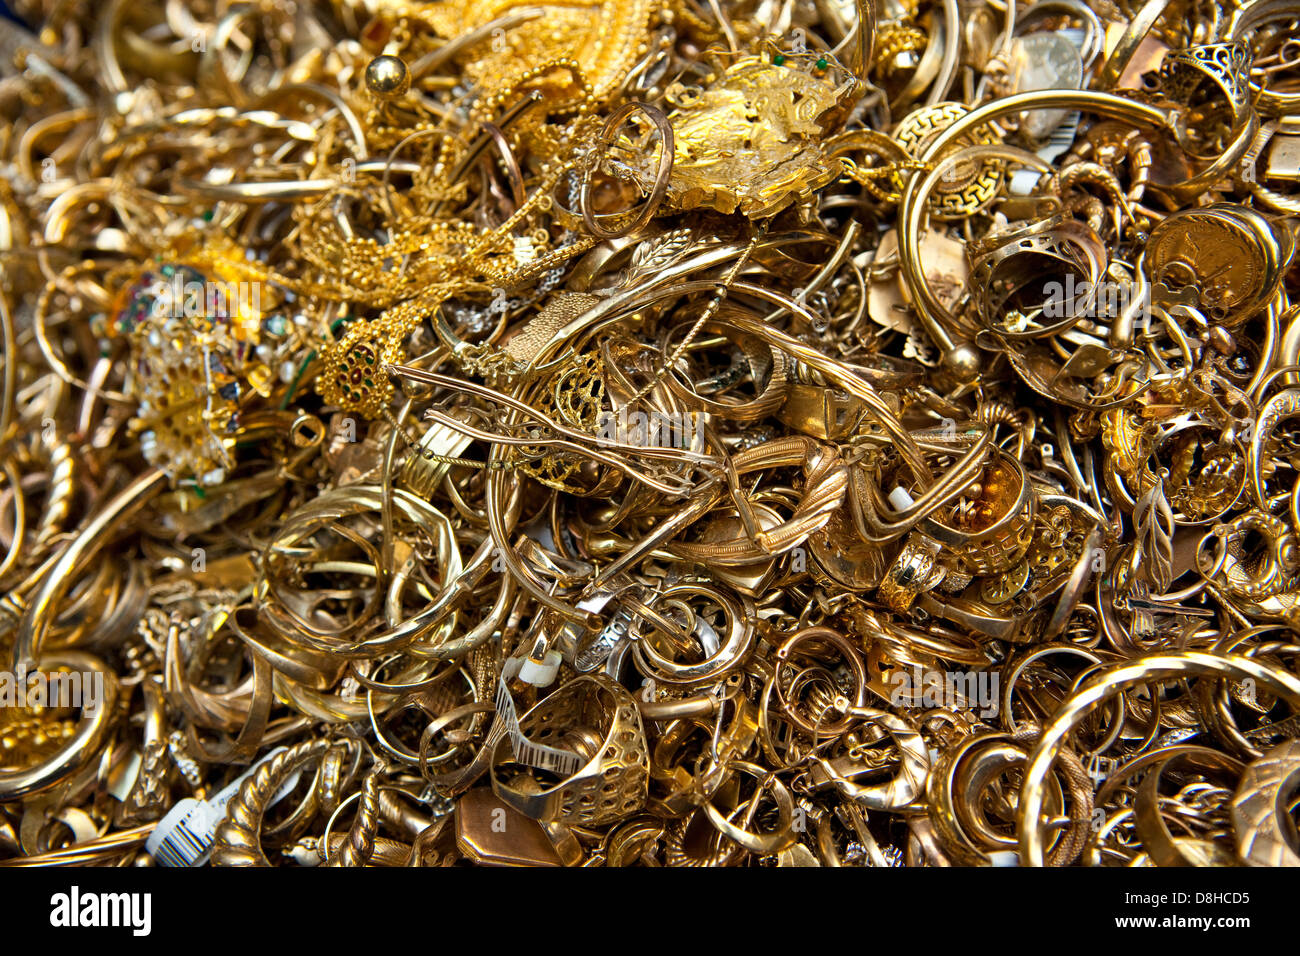 Recycling scrap gold to make a molten gold bar at the London Assay Office in Gutter Lane Photo Credit: David Levenson Stock Photo